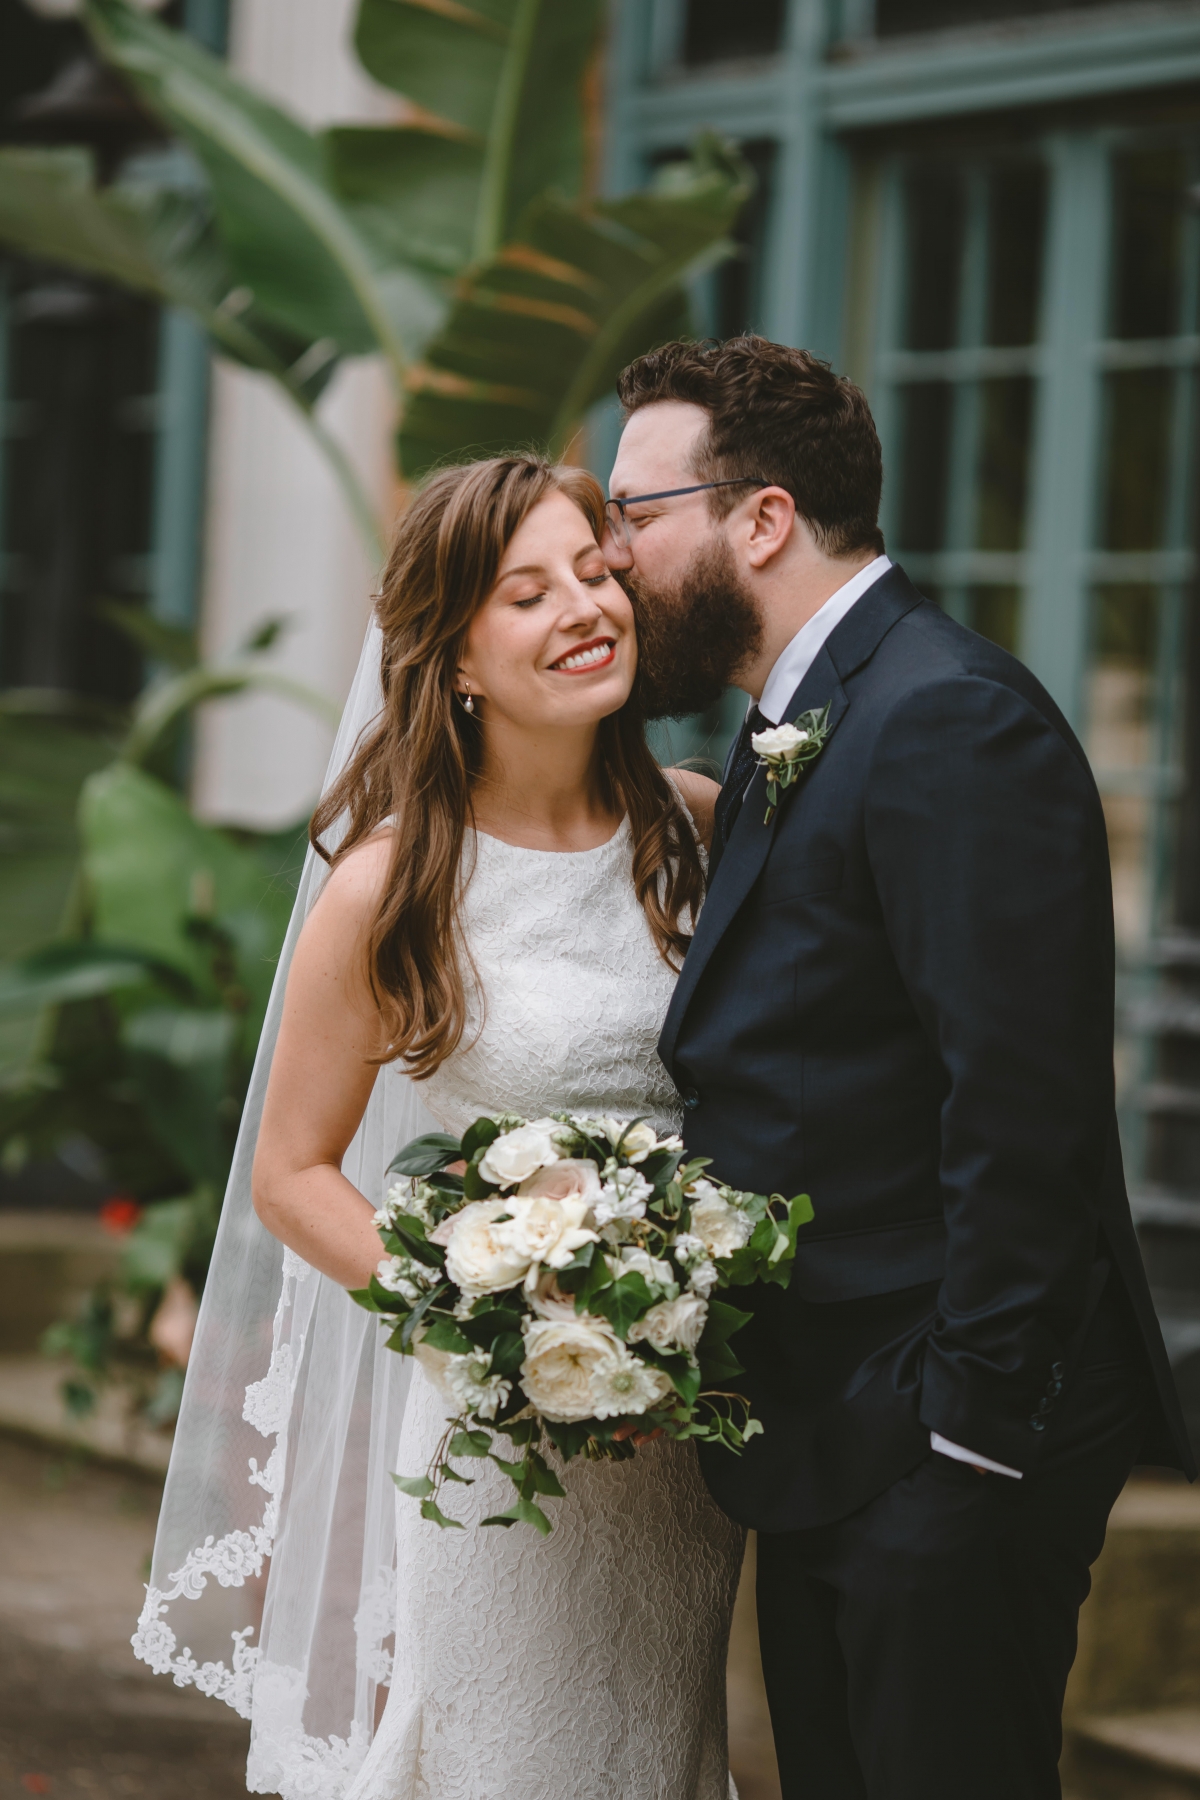 Garden Party Wedding at Columbus Park Refectory – Lakeshore in Love